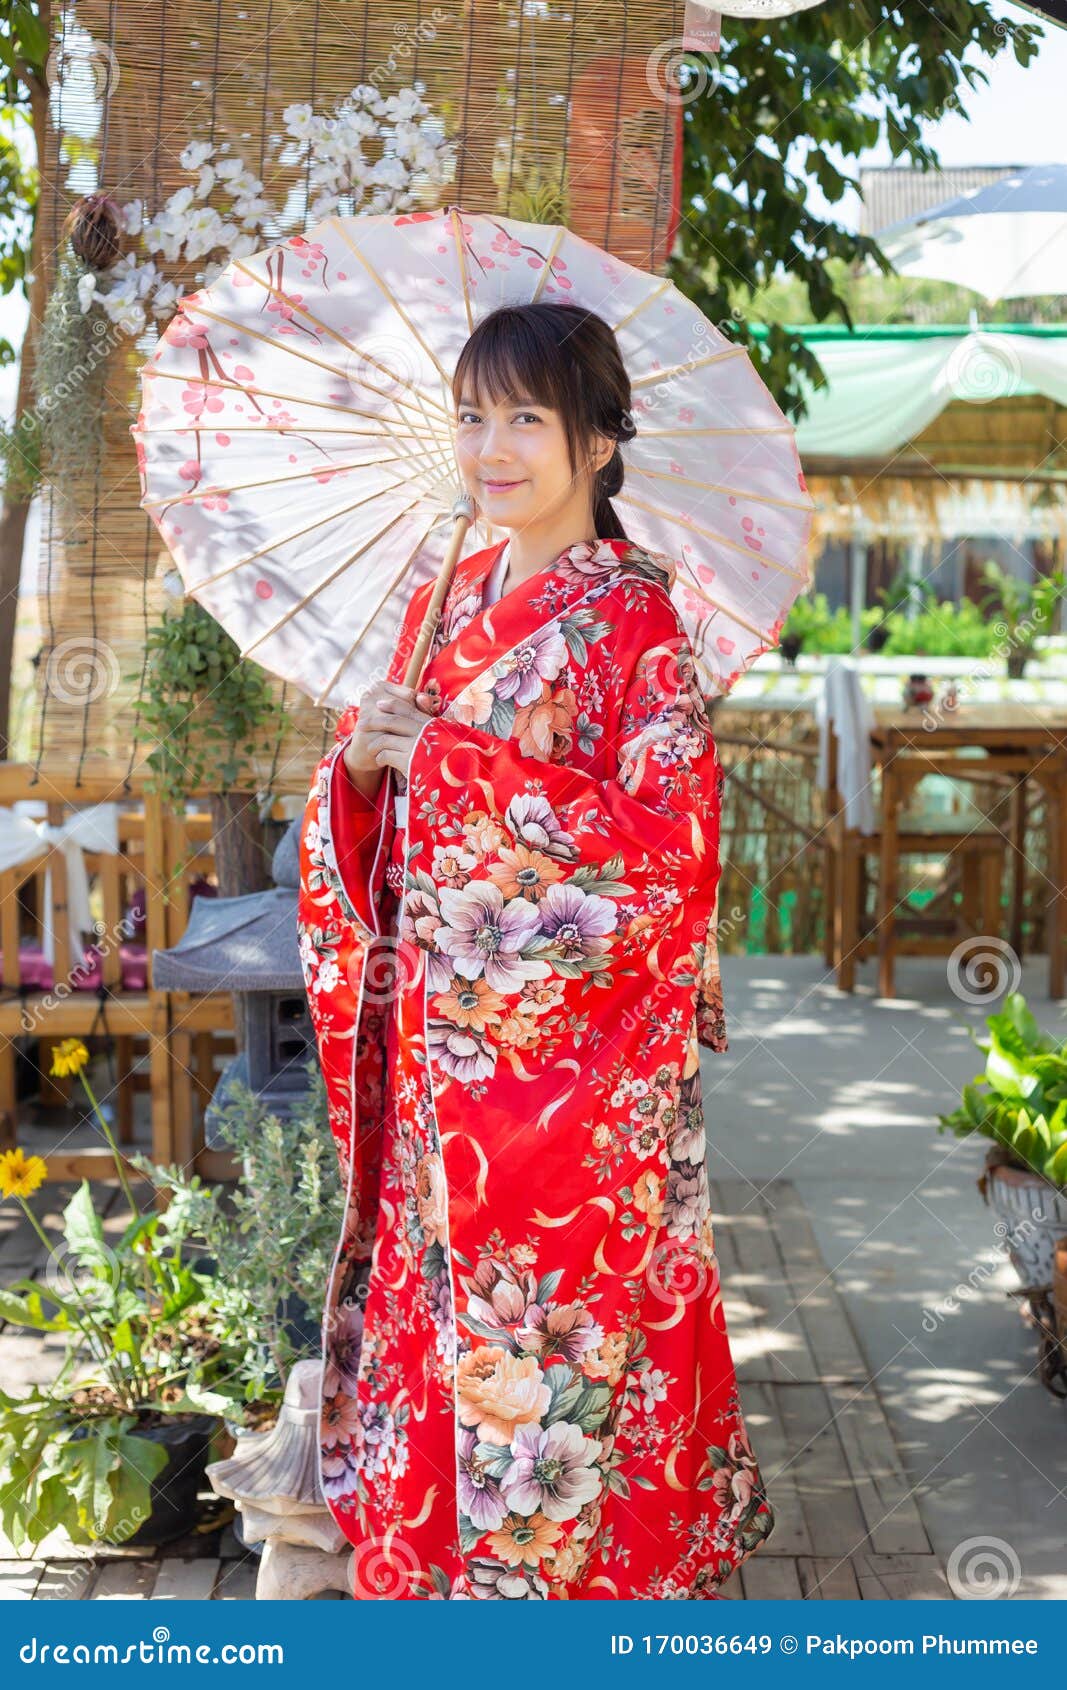 The Girl Is Wearing A Red Traditional Kimono Which Is The National Dress Of Japan Stock Image